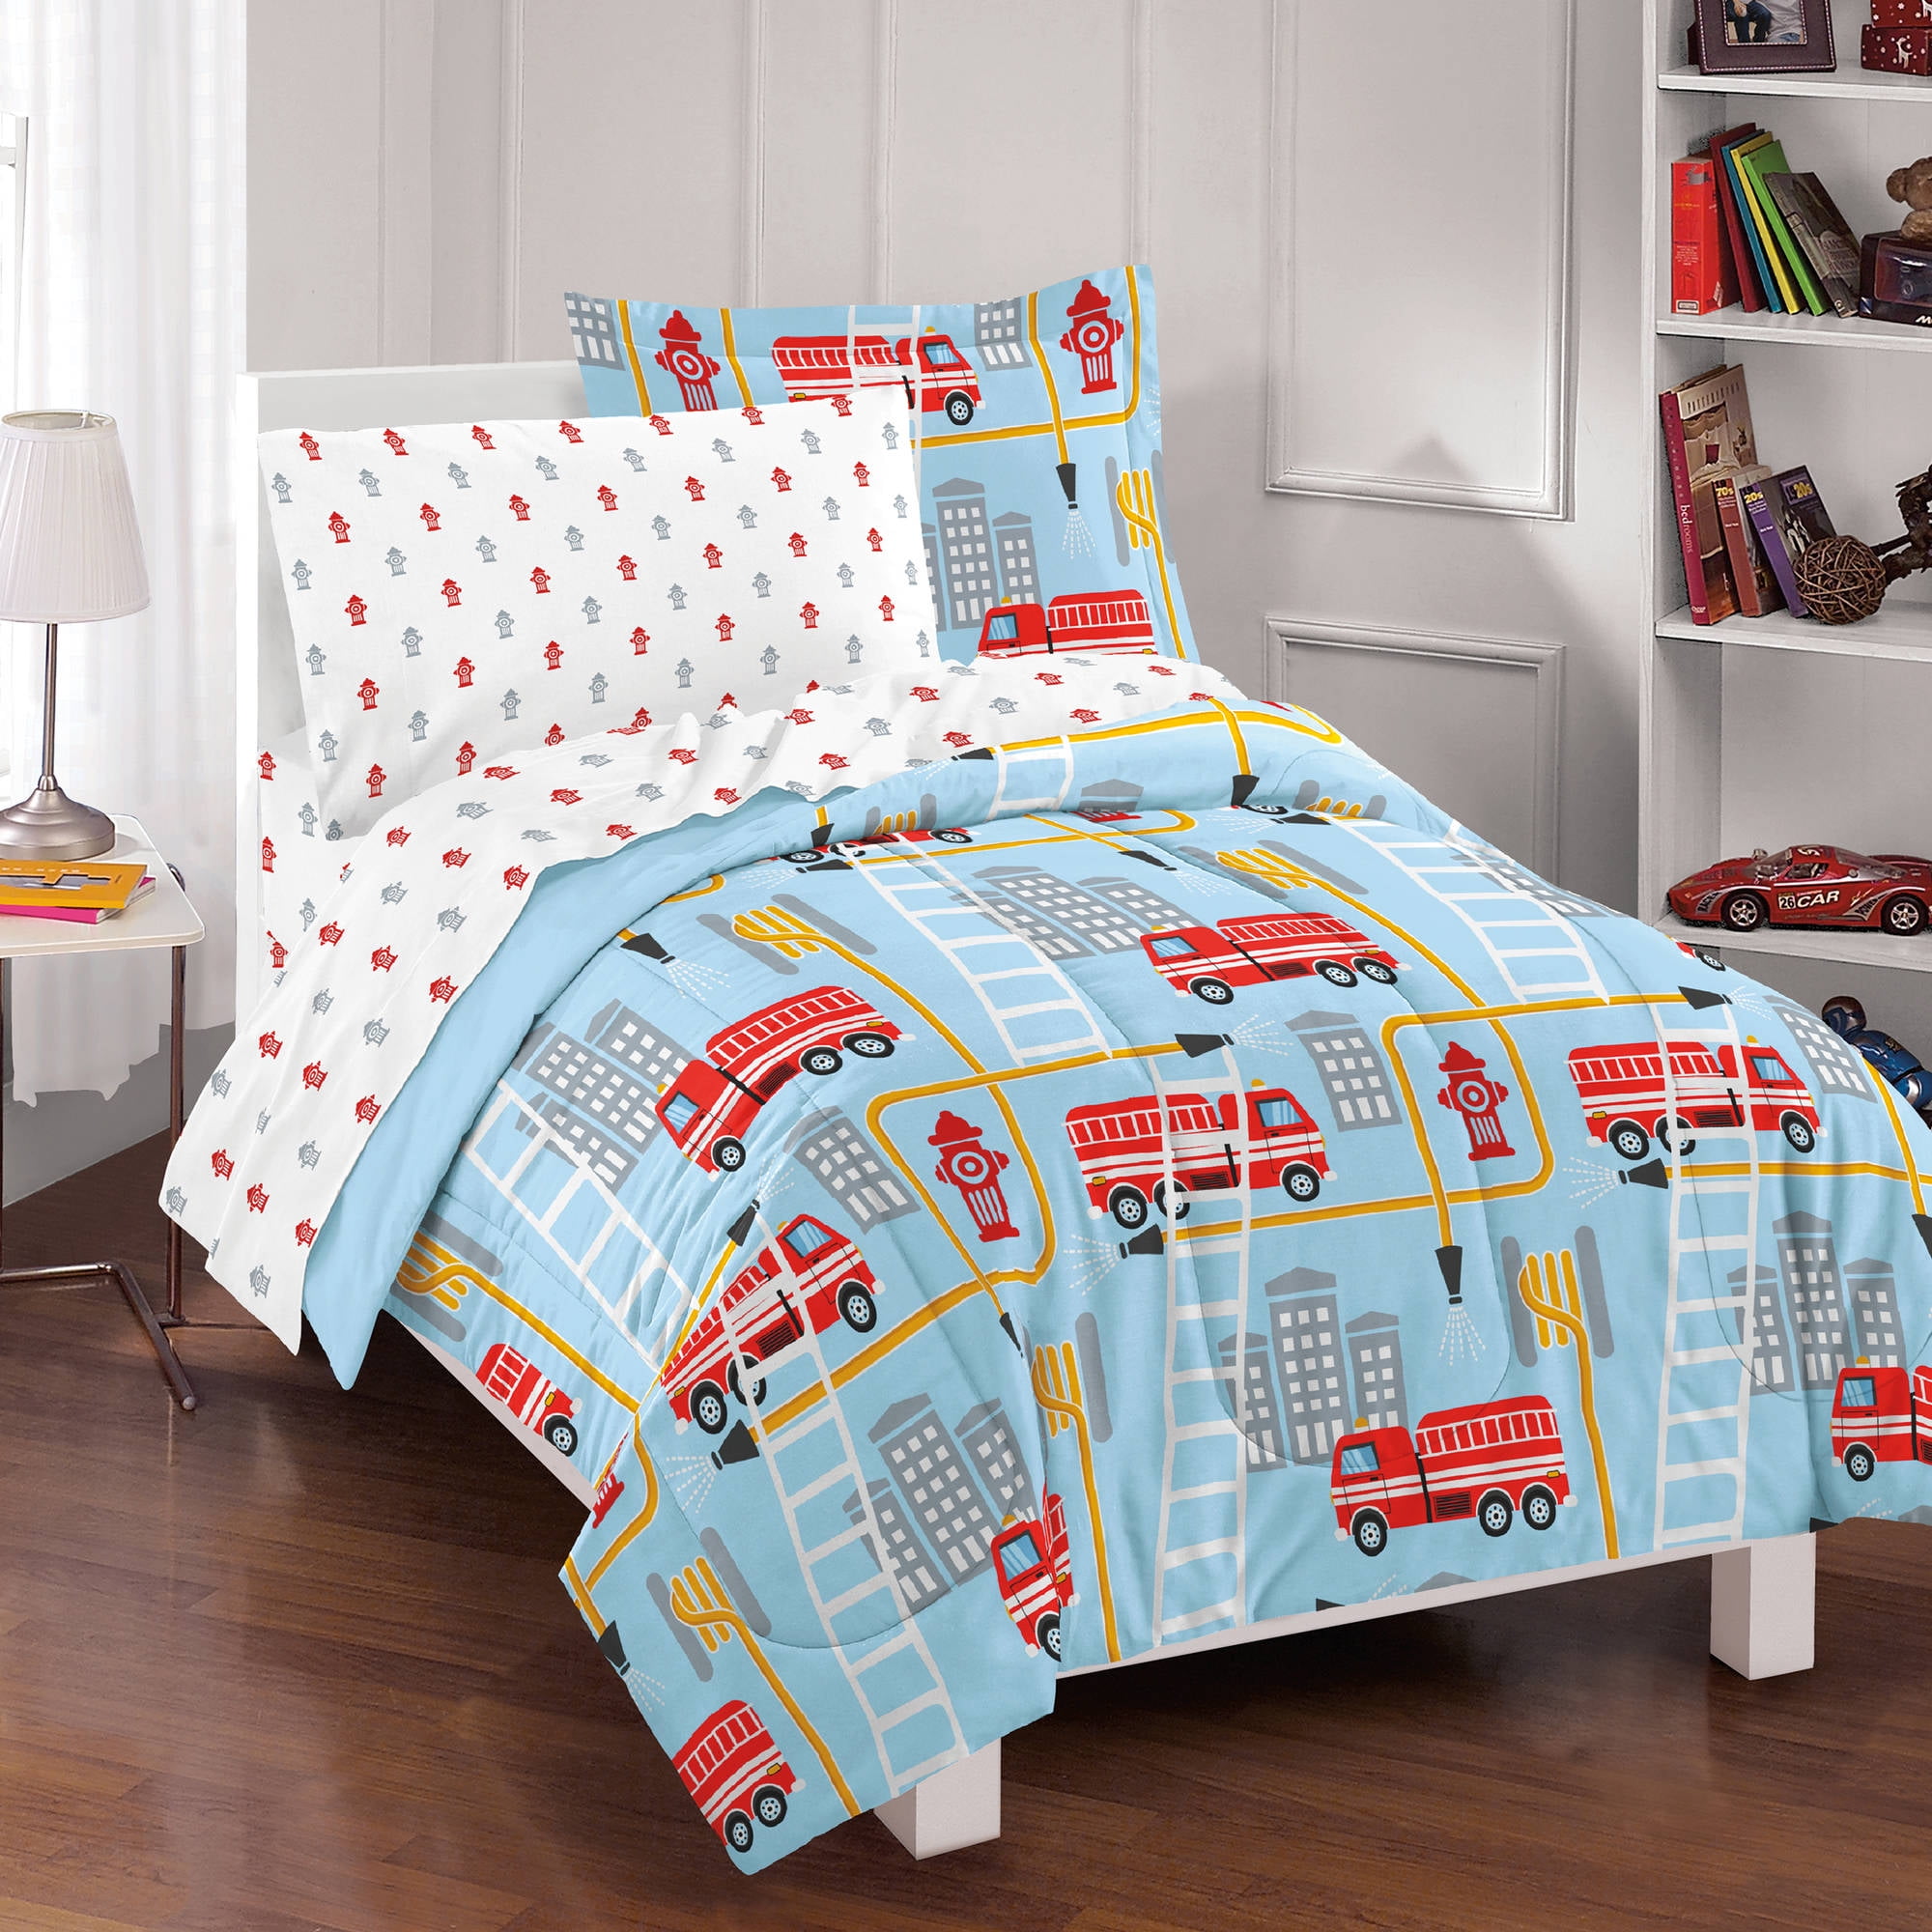 Jcpenney Kids Bedding, Jcpenney Bedding Twin